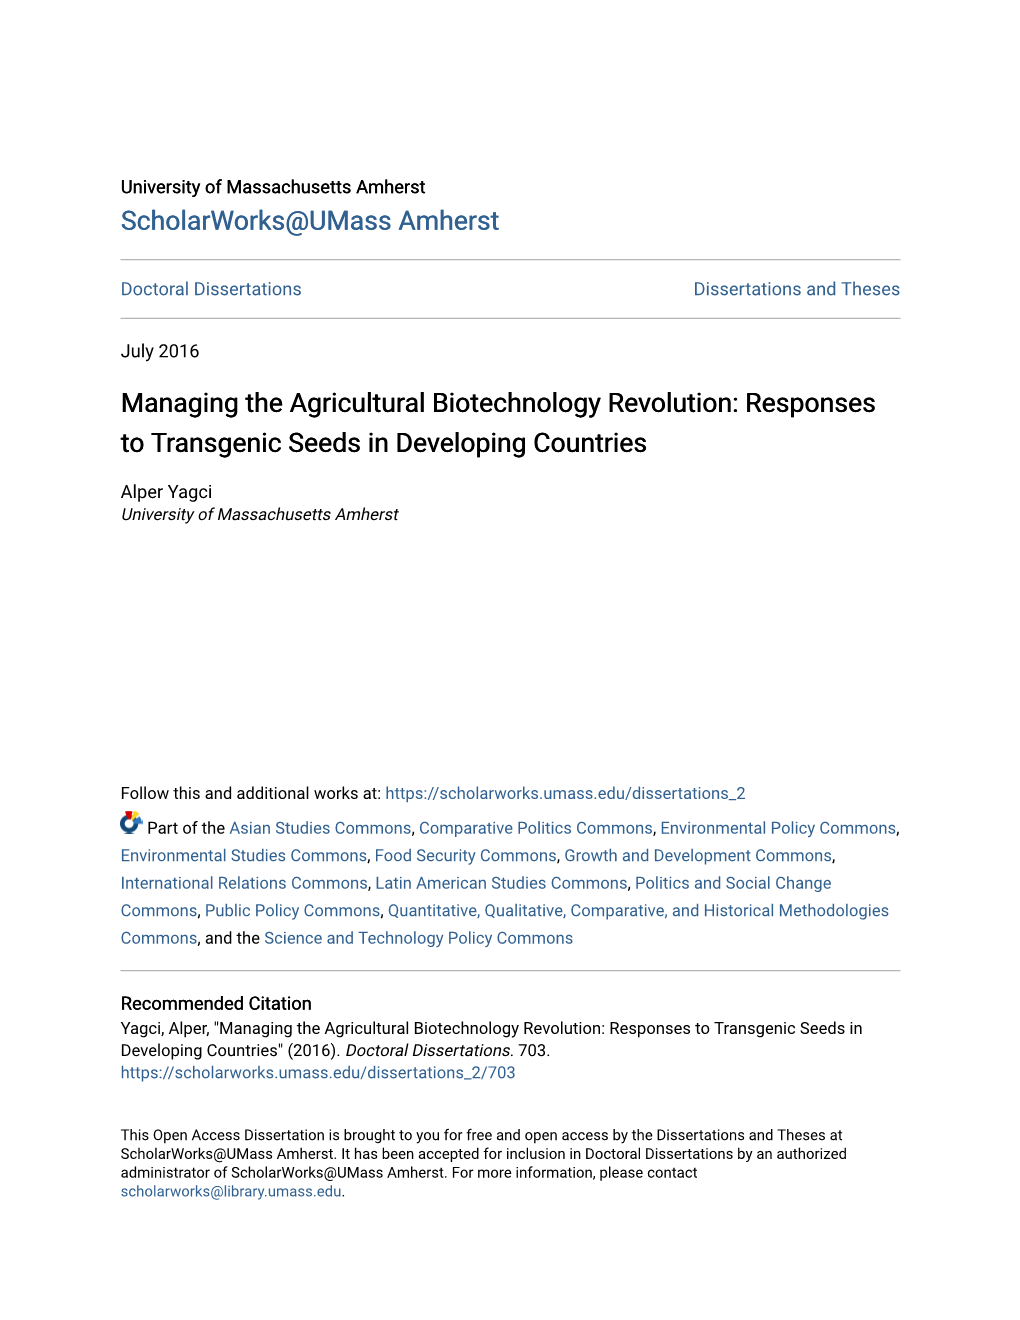 Managing the Agricultural Biotechnology Revolution: Responses to Transgenic Seeds in Developing Countries